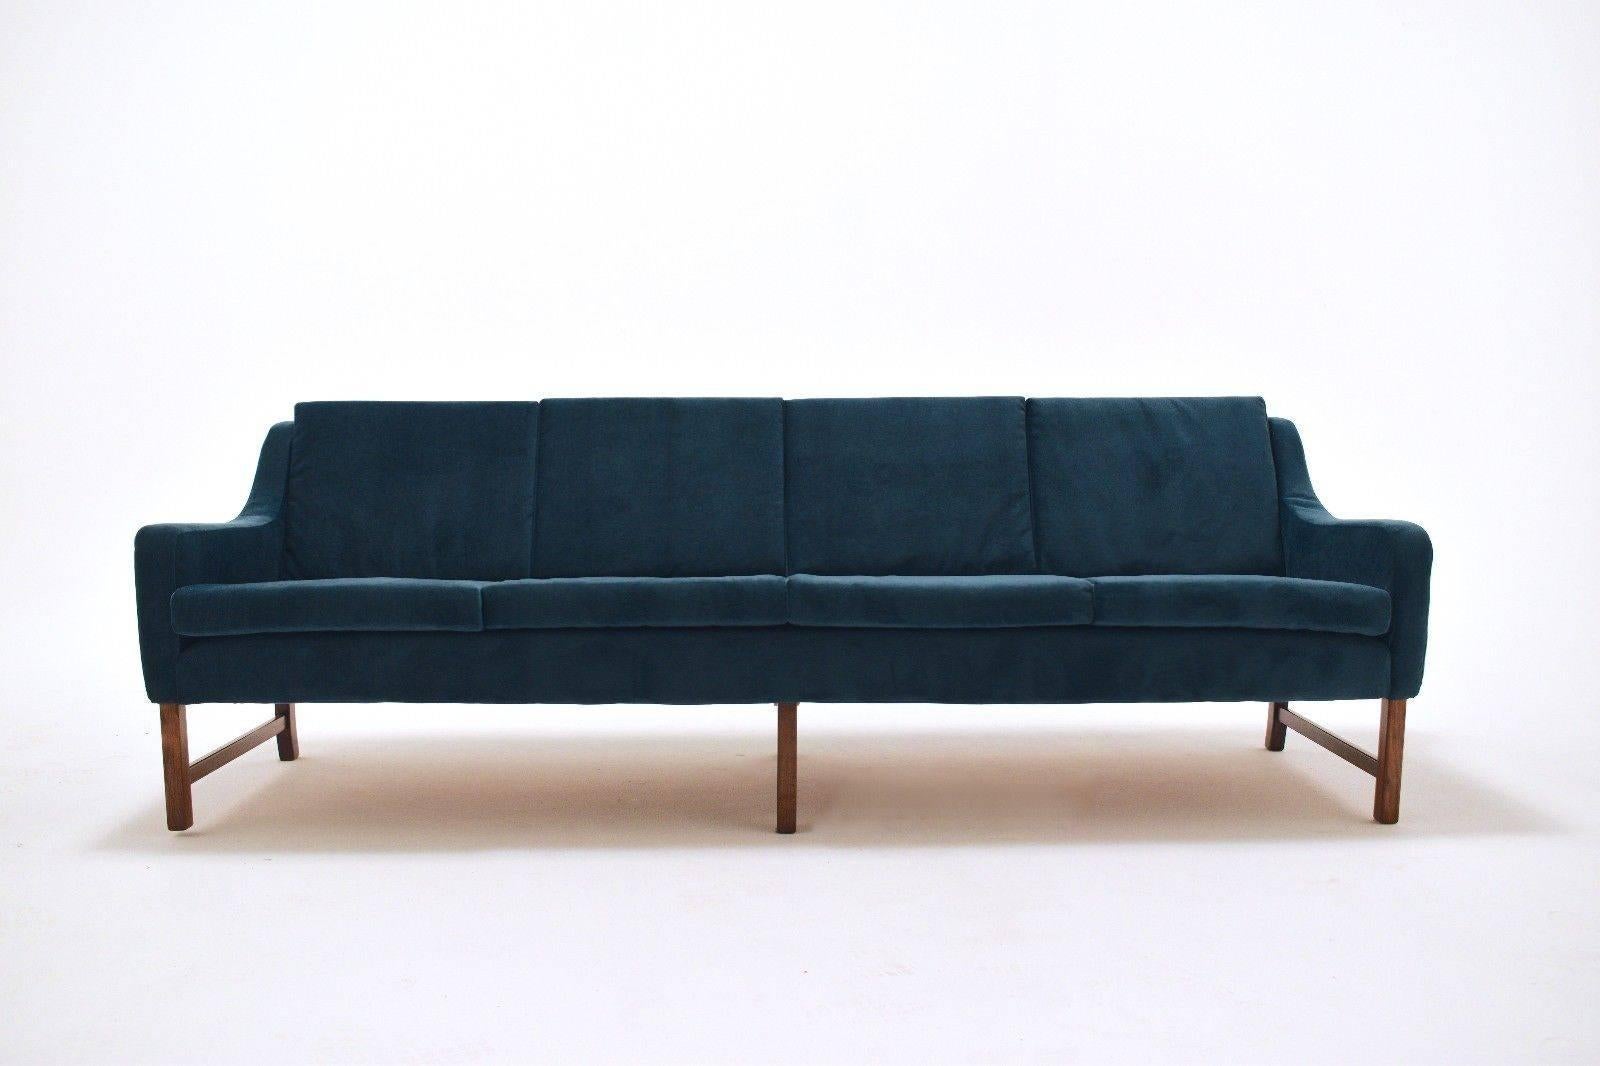 A beautiful Norwegian teal blue velvet Model 965 four seater sofa designed by Fredrik Kayser for Vatne Mobler, this would make a stylish addition to any living or work area. The sofa has a wide seat and padded armrests for enhanced comfort. A